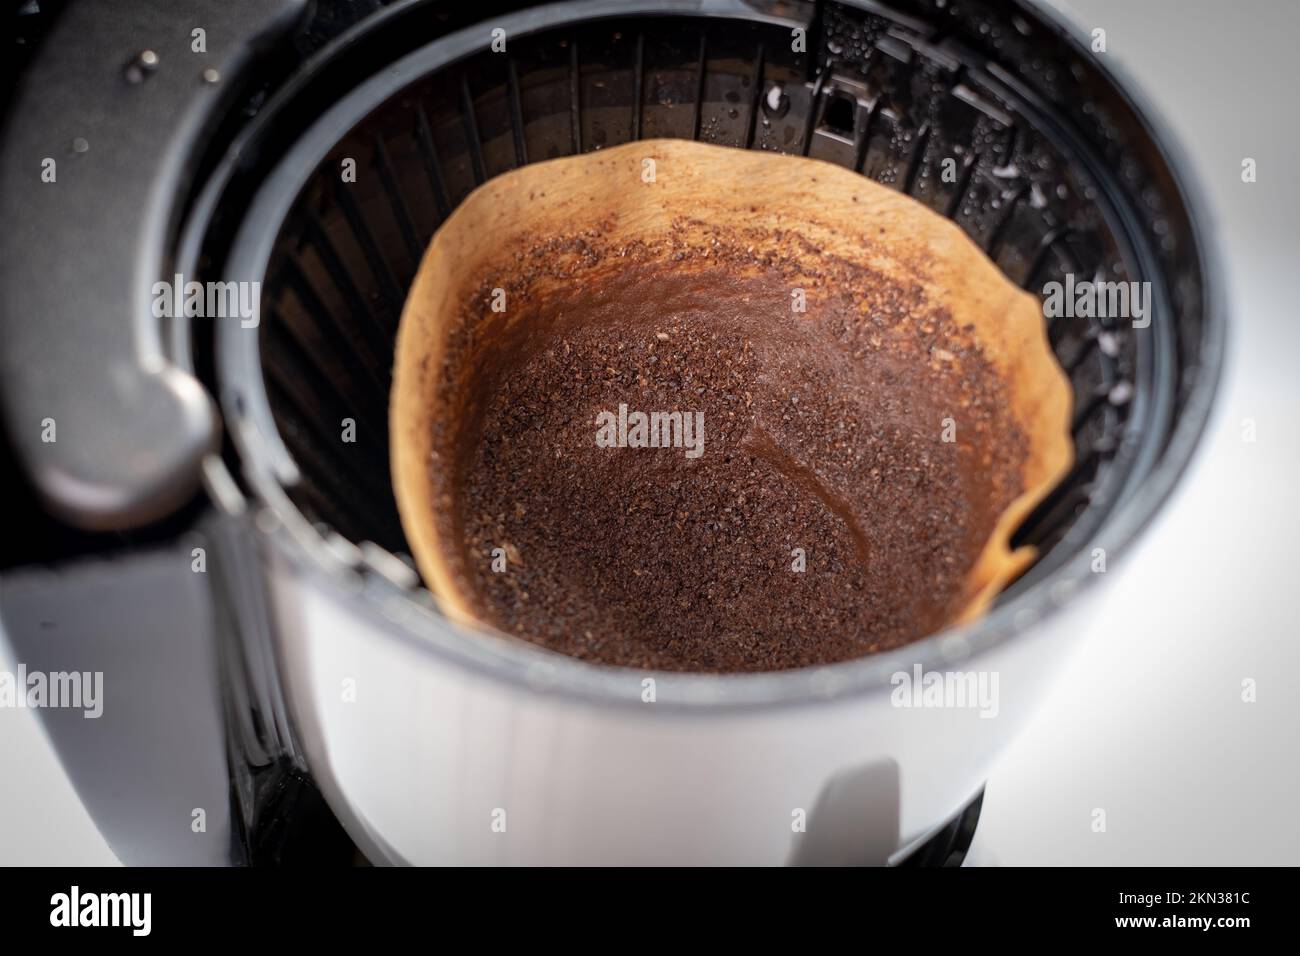 discarding used filter from coffee maker. used filter coffee in the machine. filter coffee grounds Stock Photo